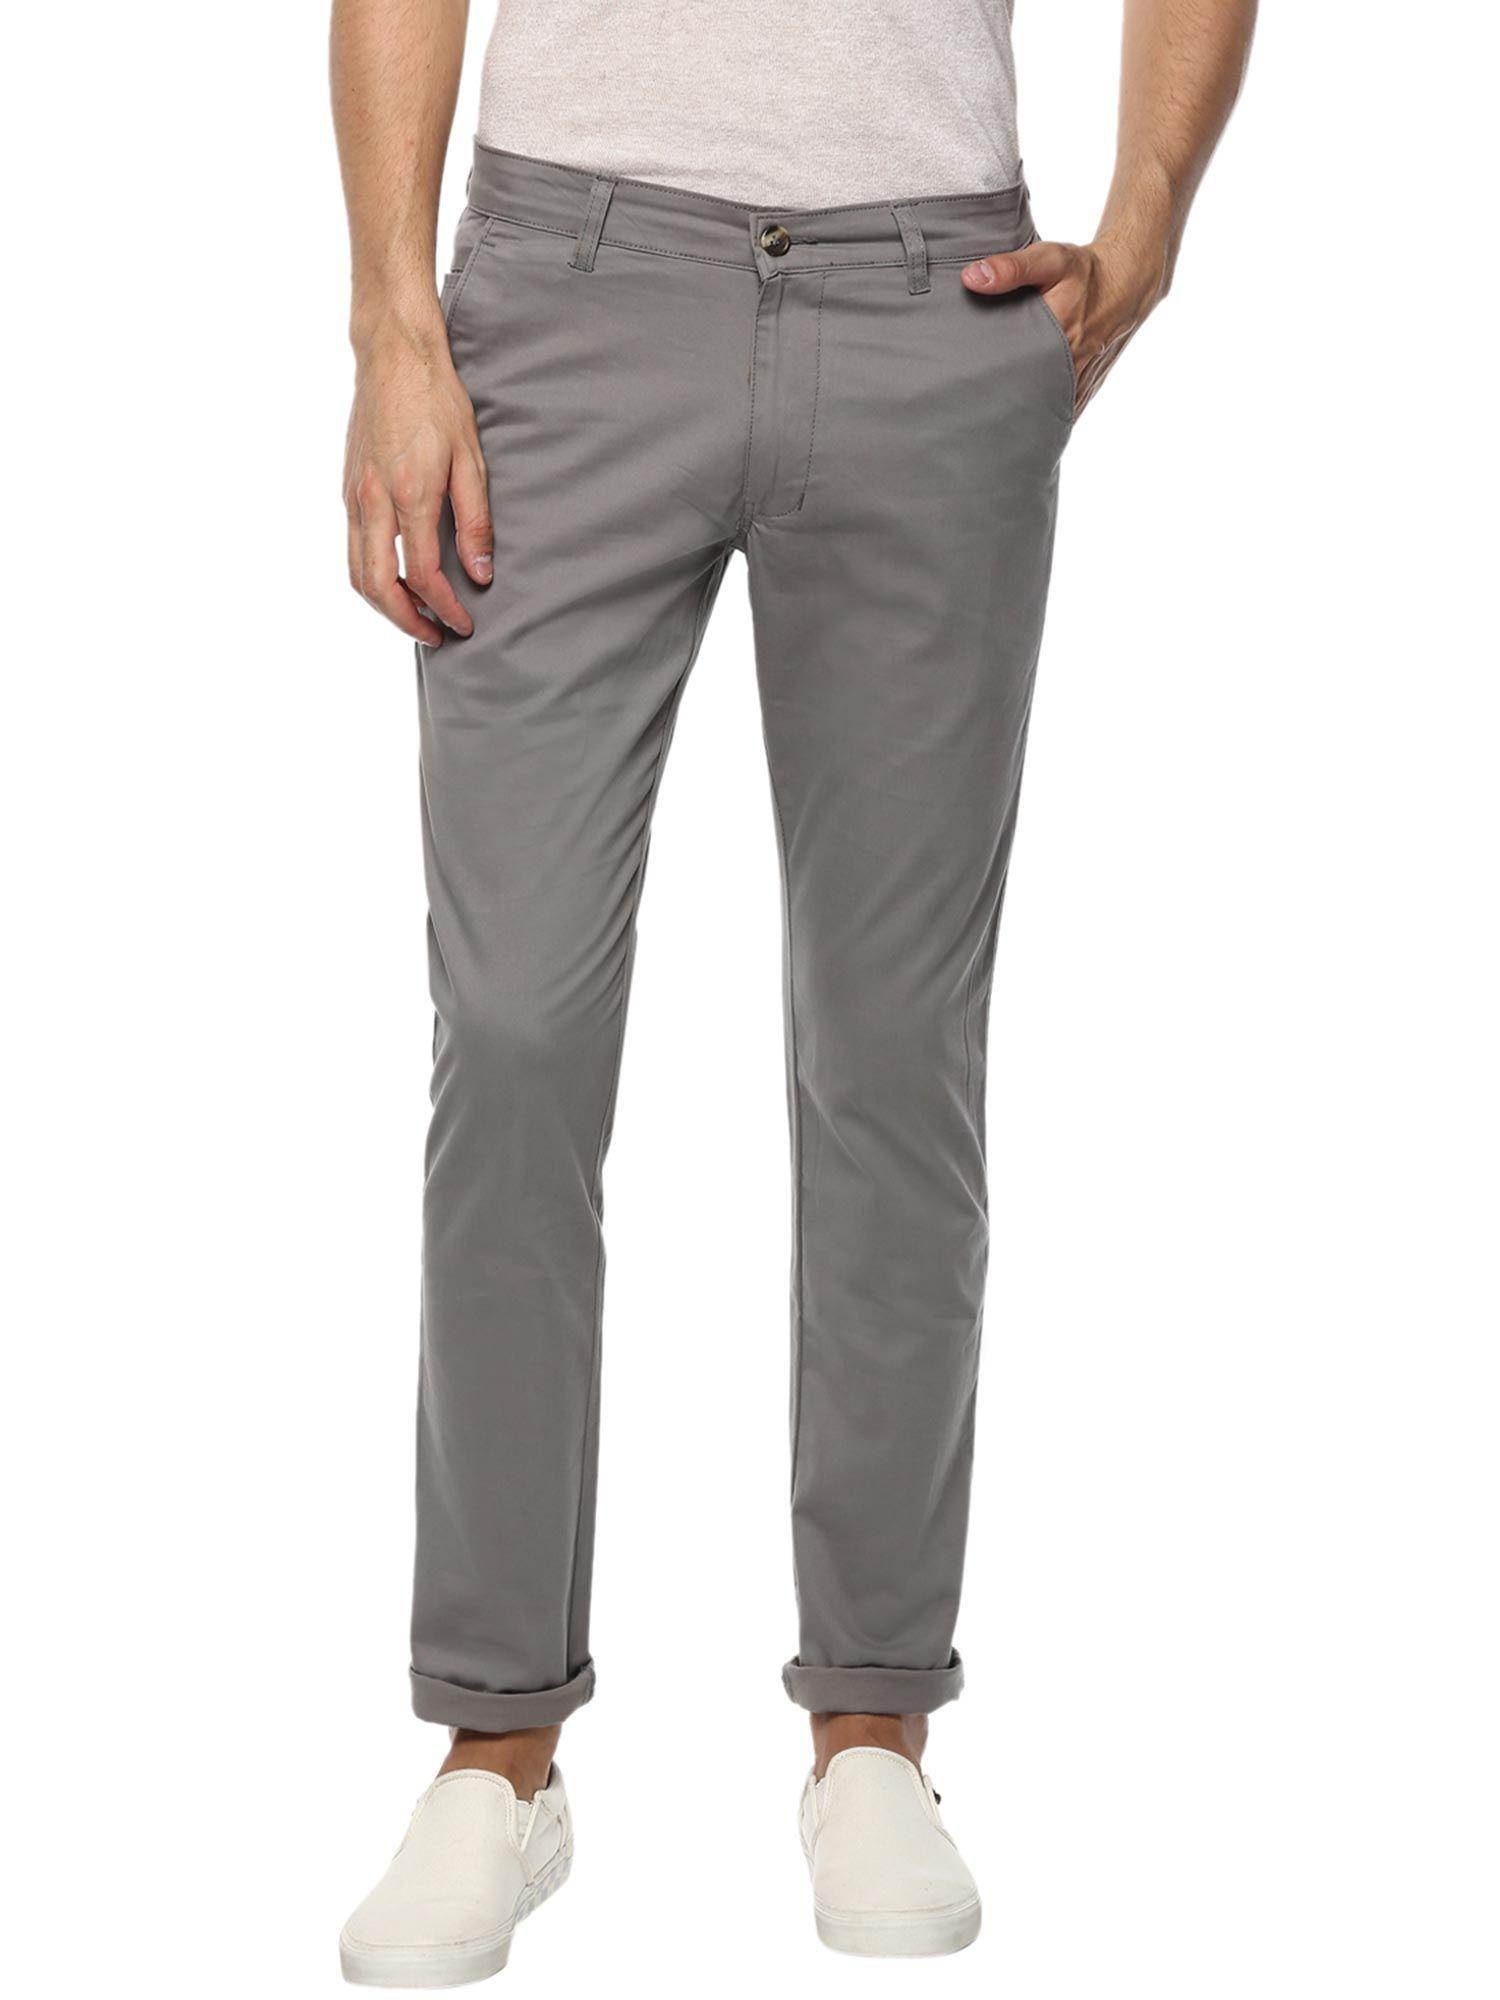 men-grey-cotton-slim-fit-casual-chinos-trousers-stretch